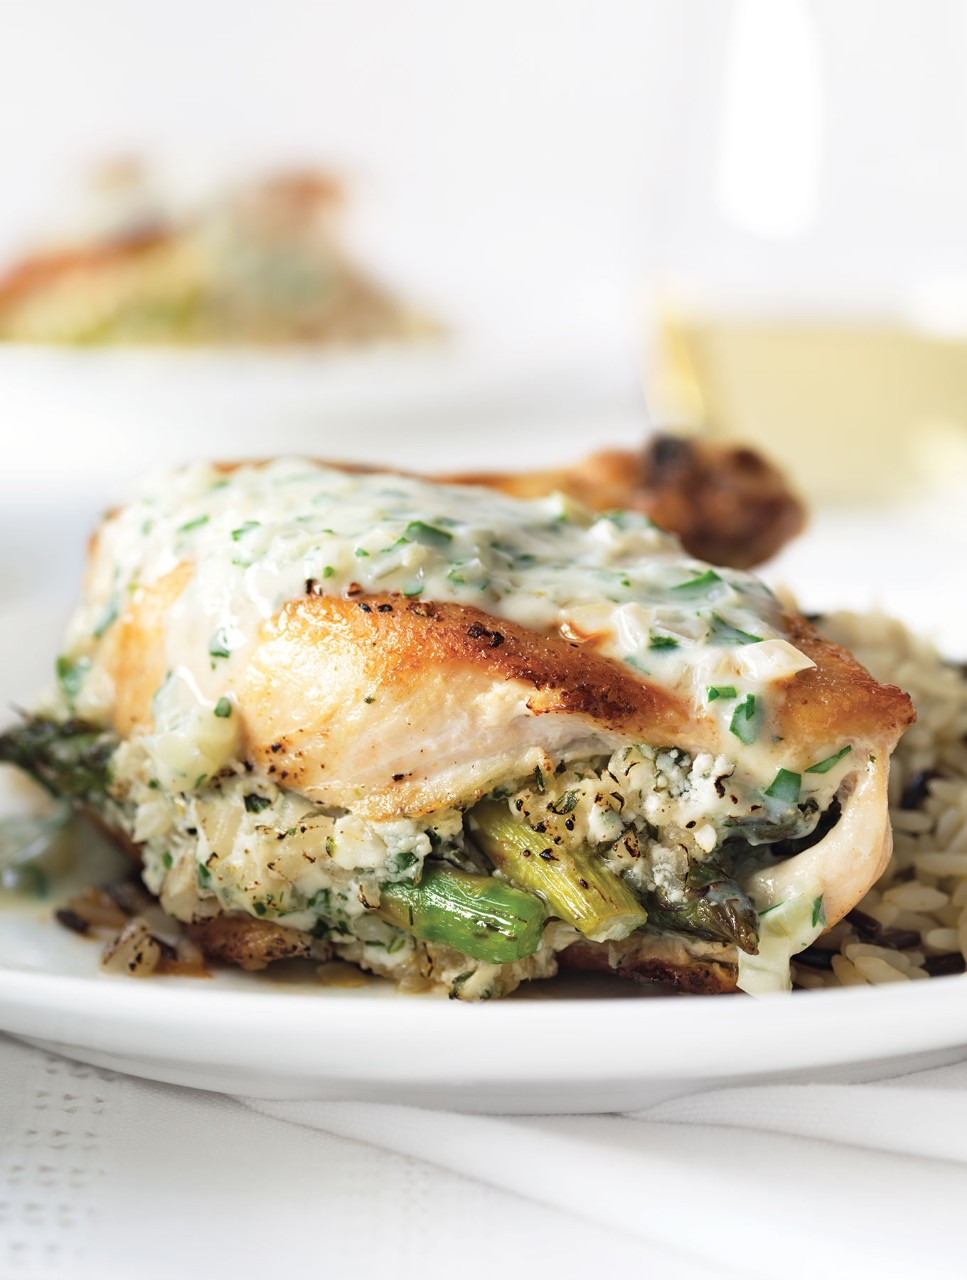 Asparagus-Stuffed Chicken with White Wine-Shallot Sauce